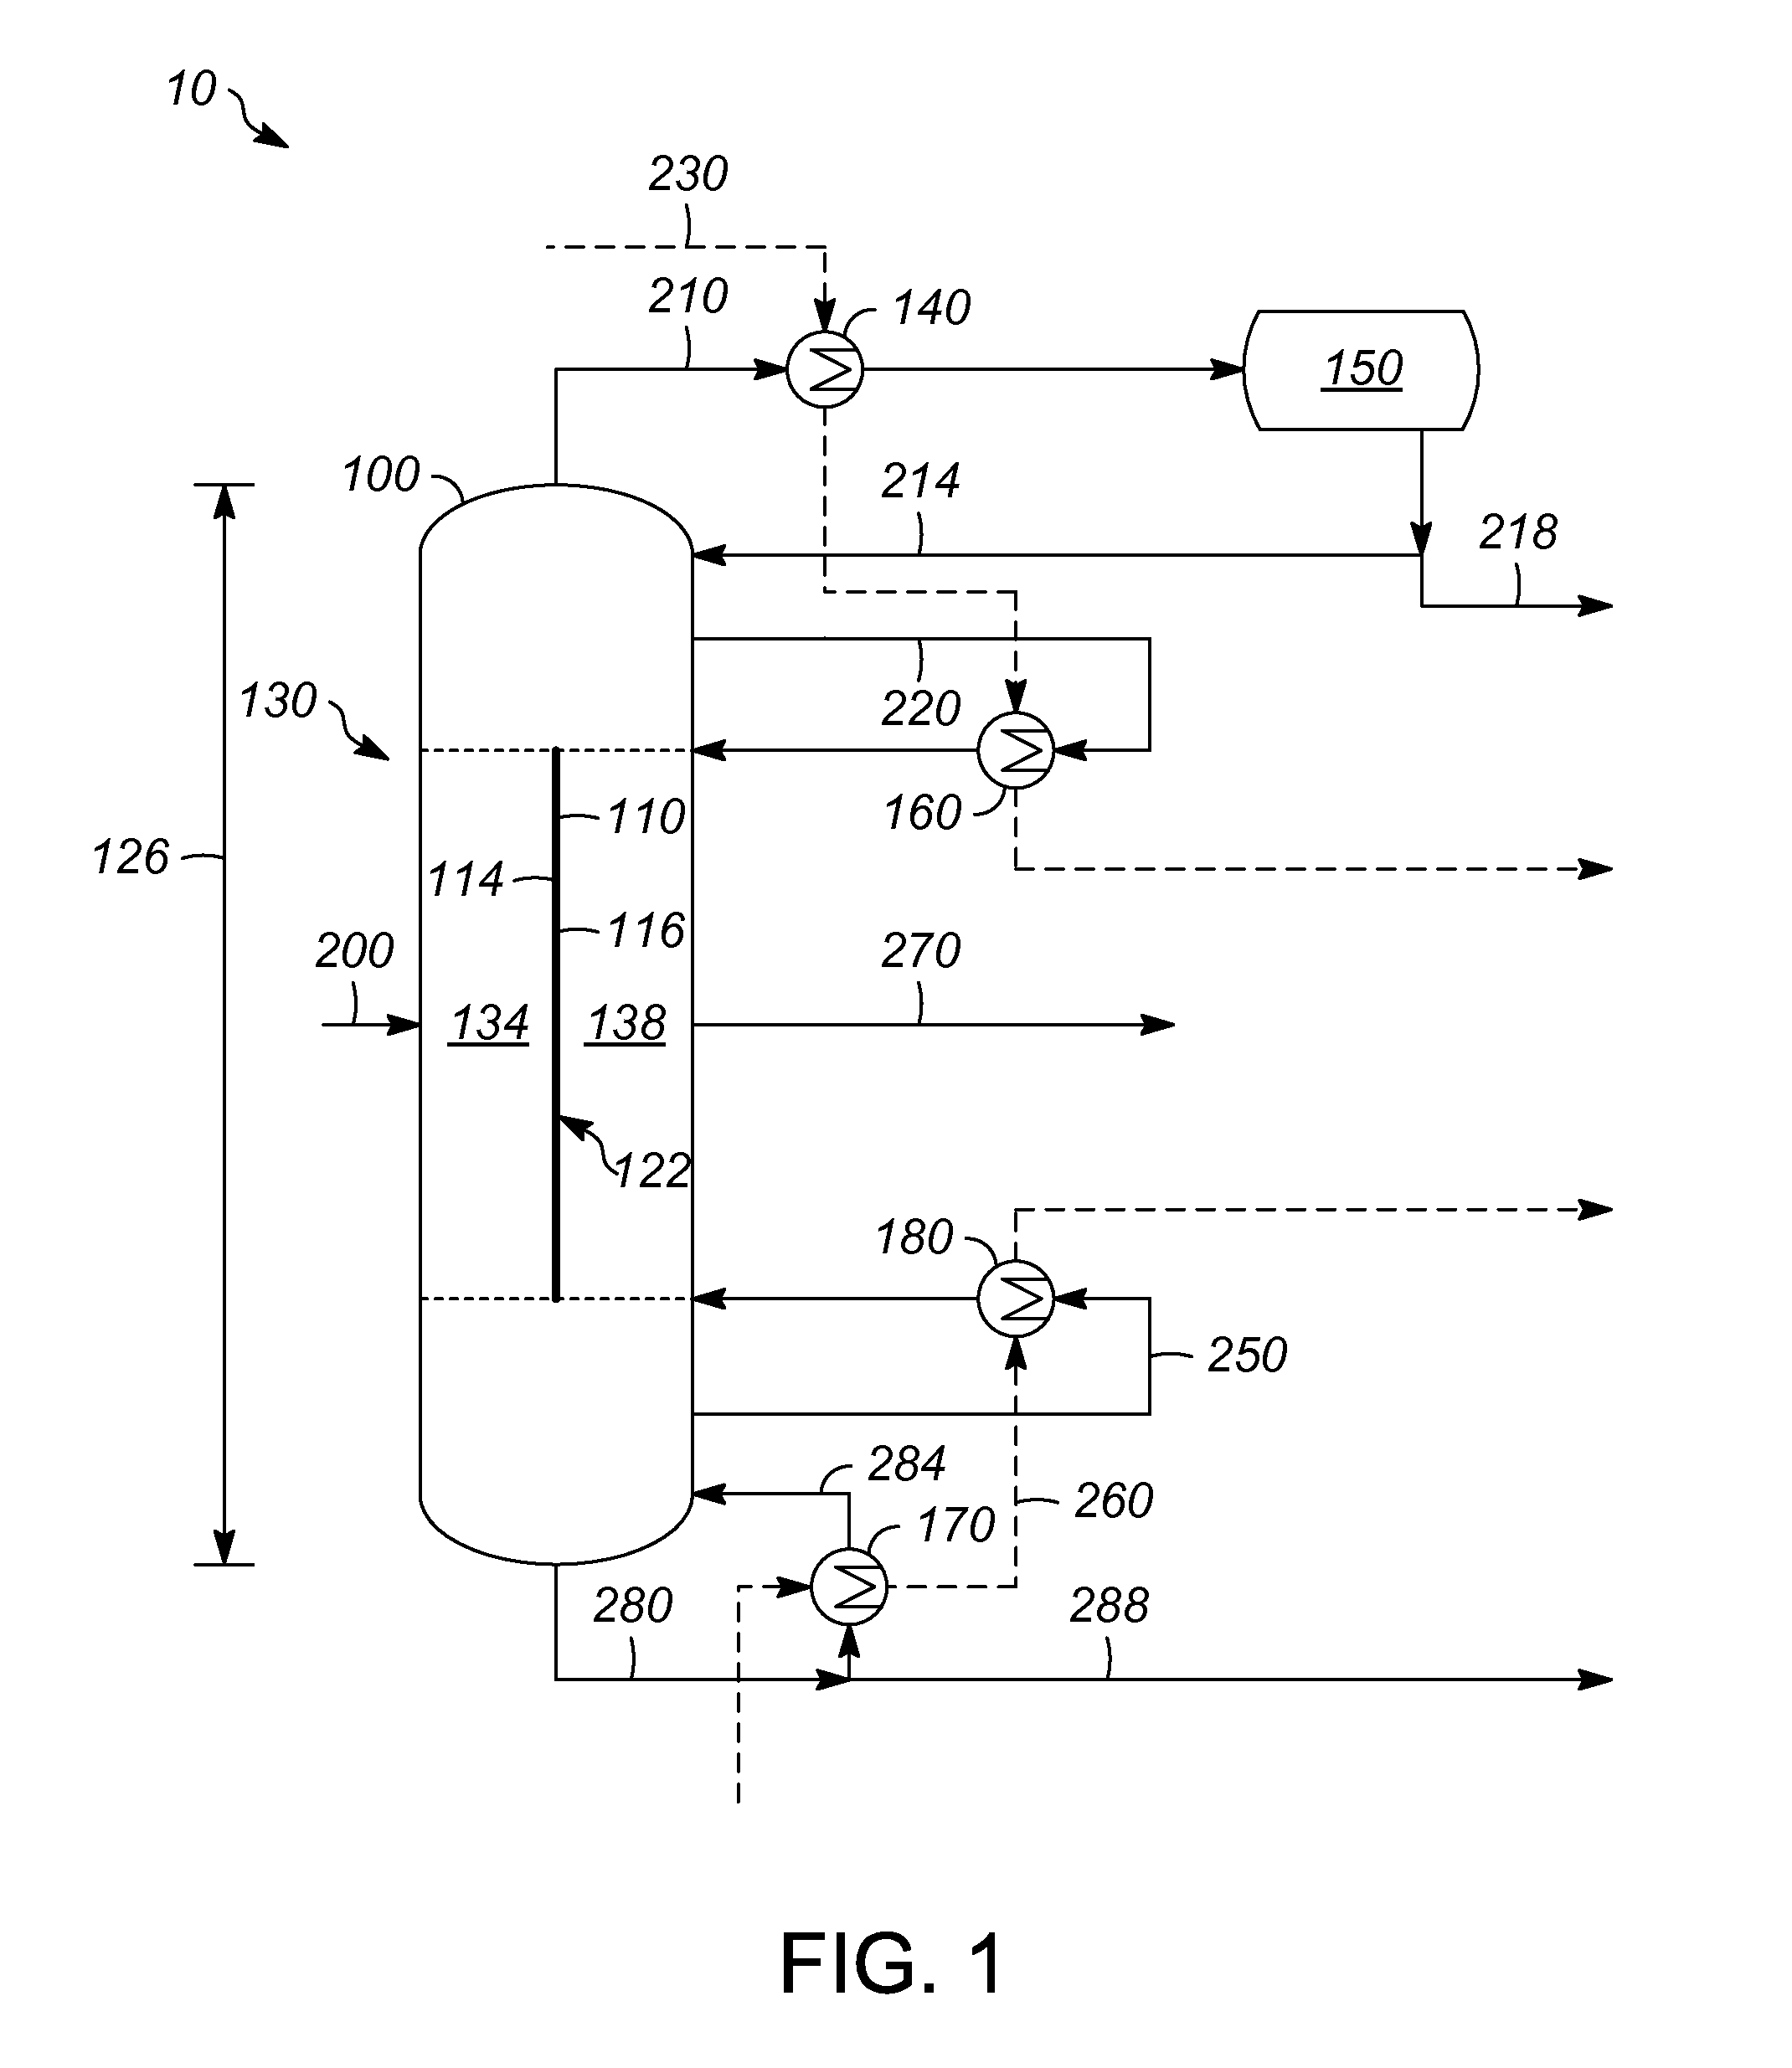 Process and system for heating or cooling streams for a divided distillation column